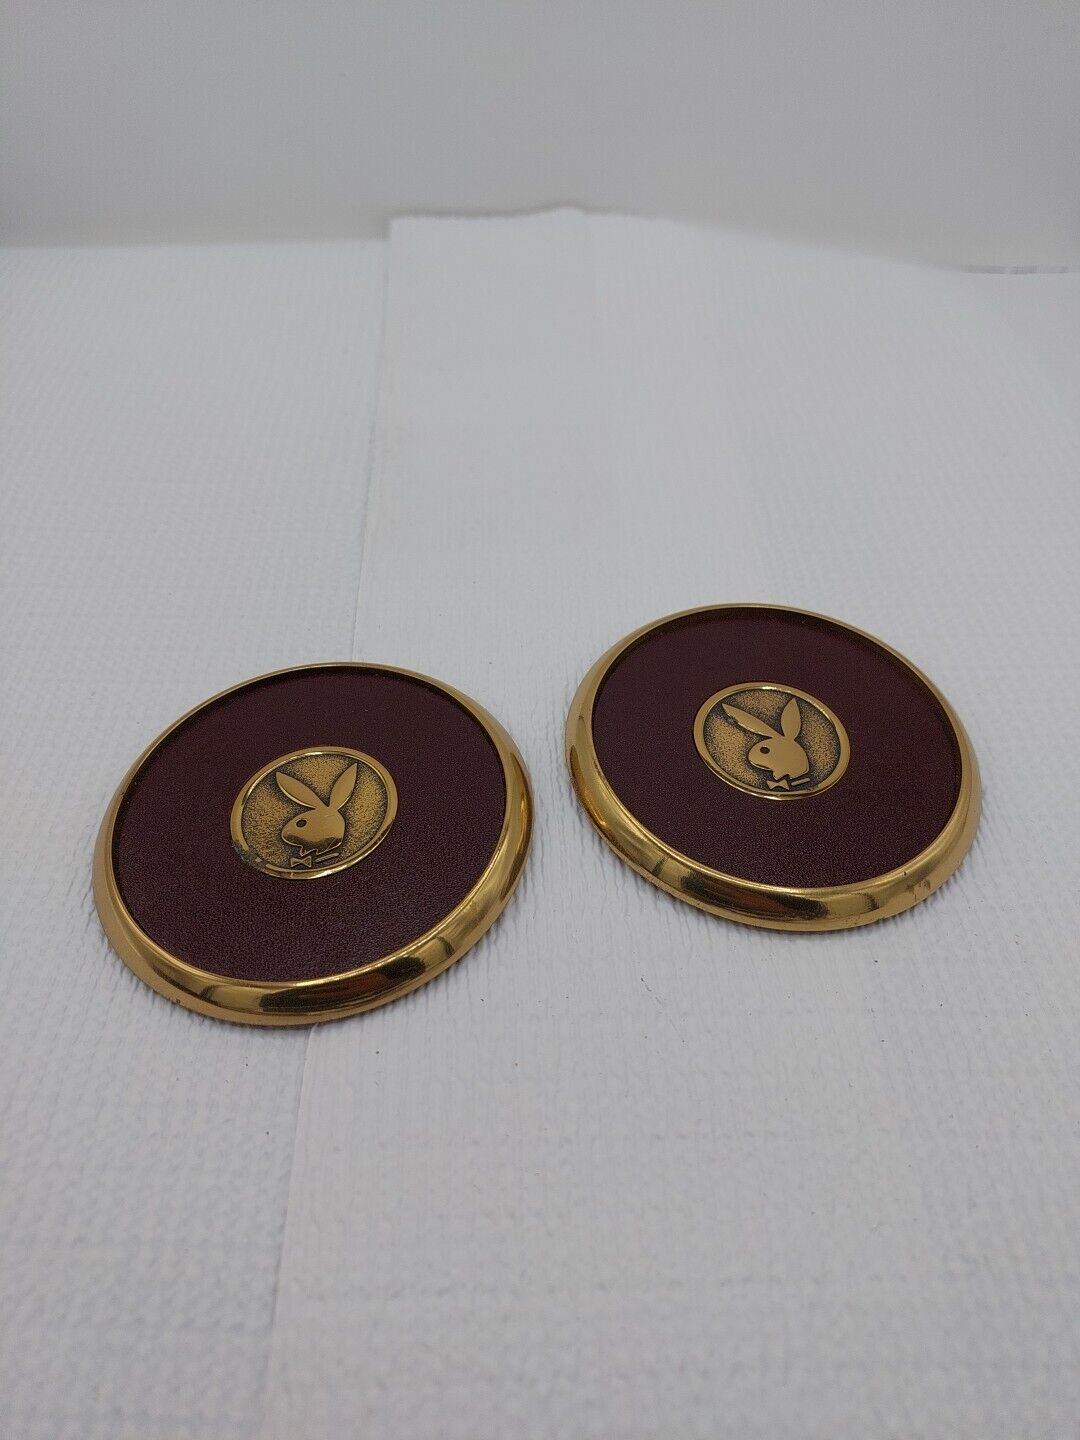 Lot of 2 Vintage Playboy Brass and Leather Beverage Coasters